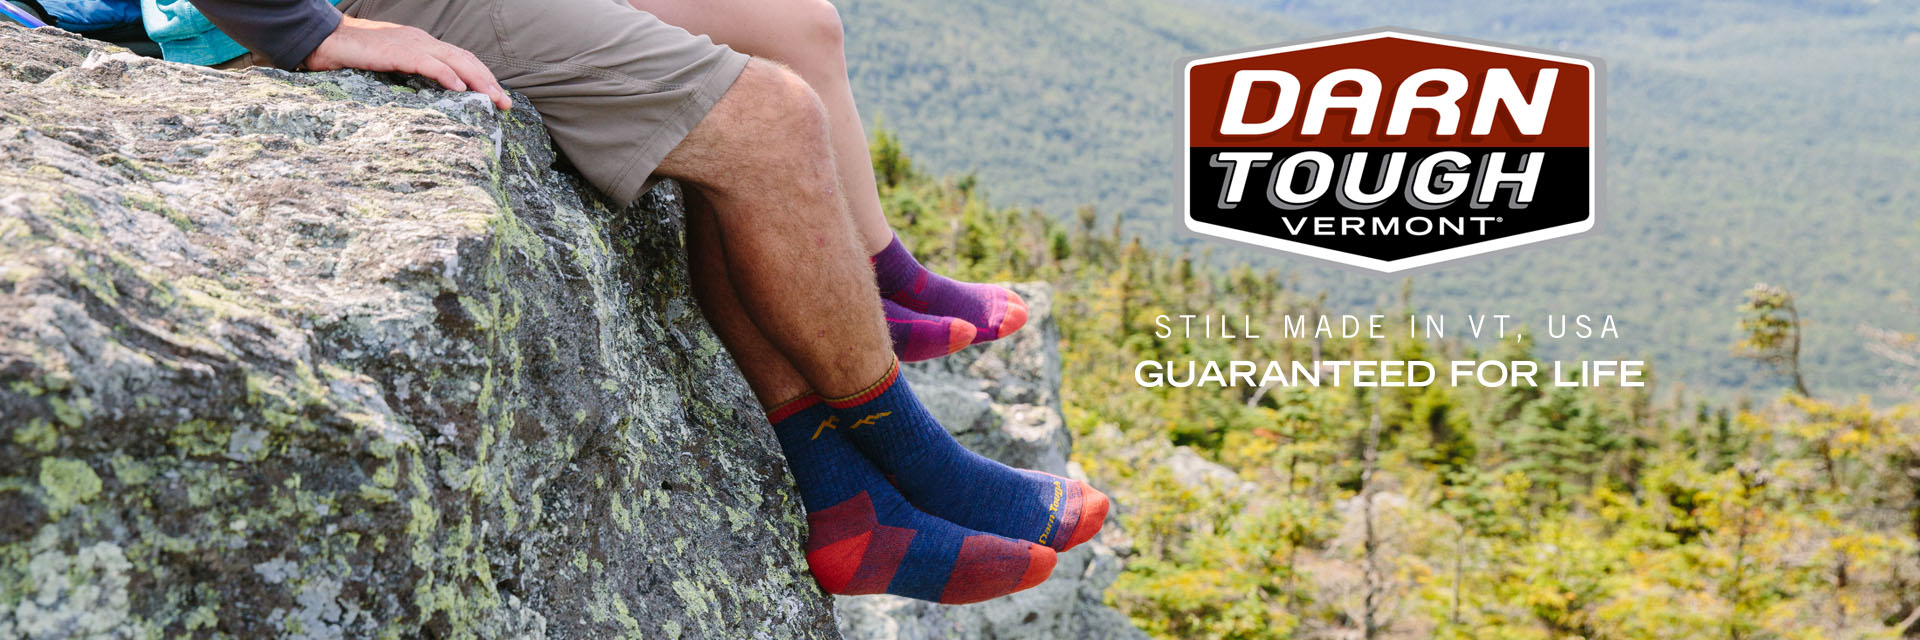 Darn Tough Socks Hike Banner view two people sitting on a cliff